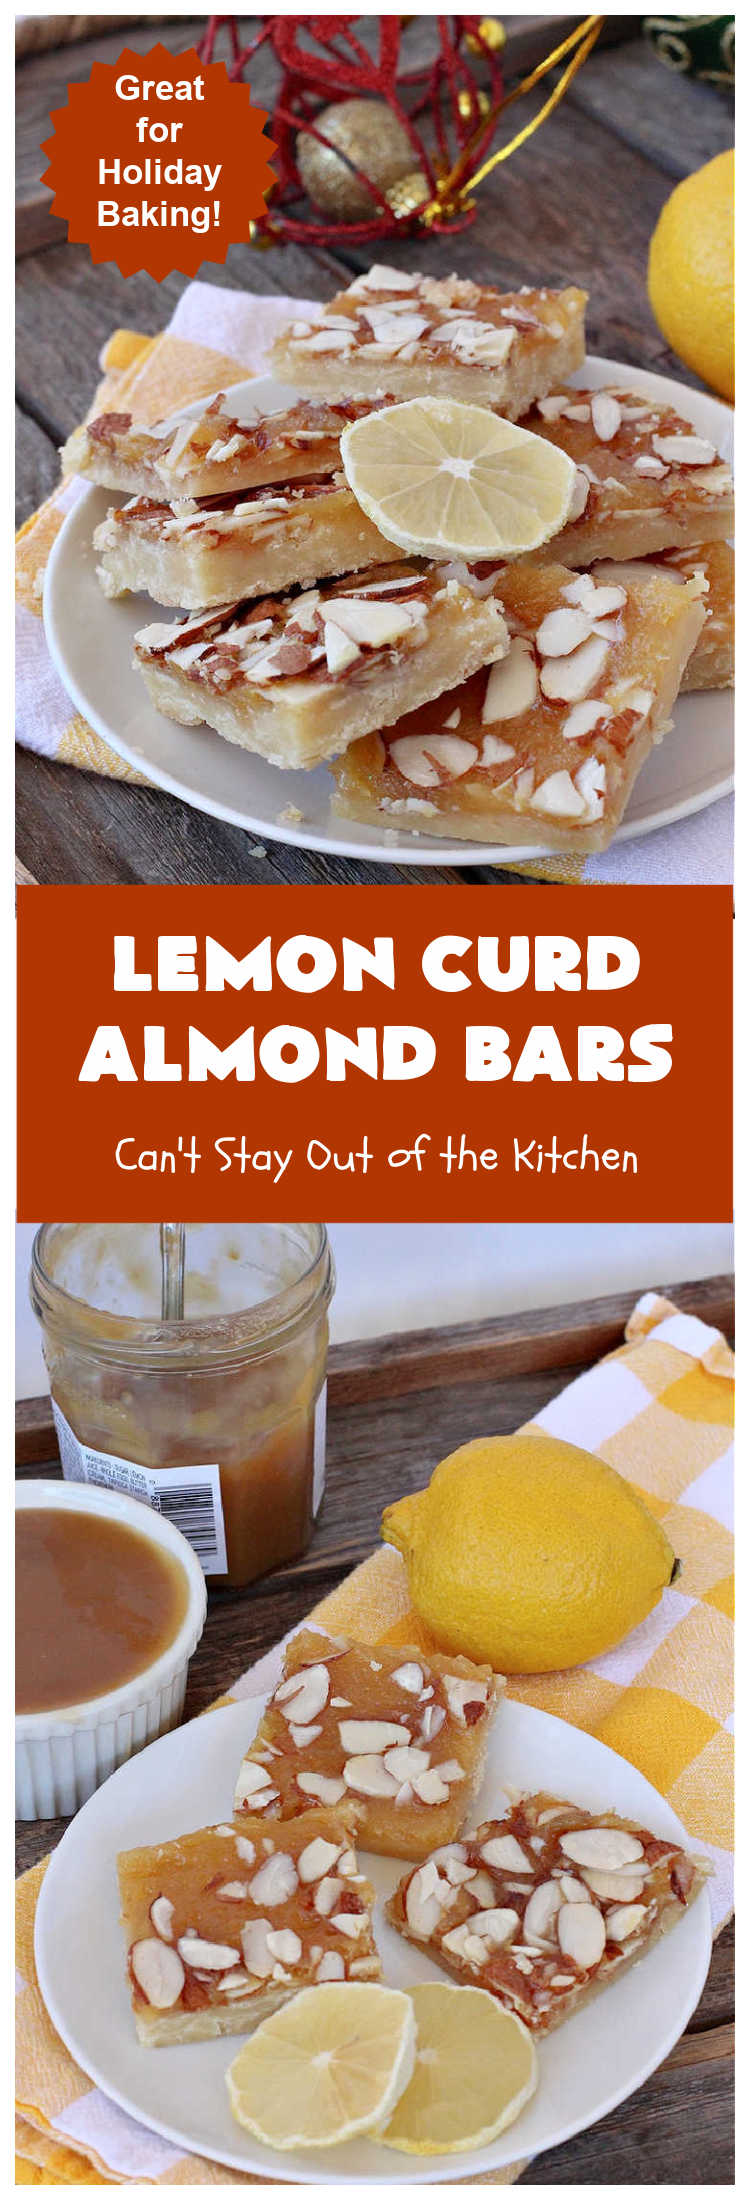 Lemon Curd Almond Bars | Can't Stay Out of the Kitchen | these drool-worthy #cookies are perfect for #holiday #baking & #Christmas or #NewYearsDay parties. #LemonCurd in the filling makes these goodies sensational. #dessert #HolidayDessert #LemonCurdDessert #almonds #AlmondDessert #LemonCurdAlmondBars